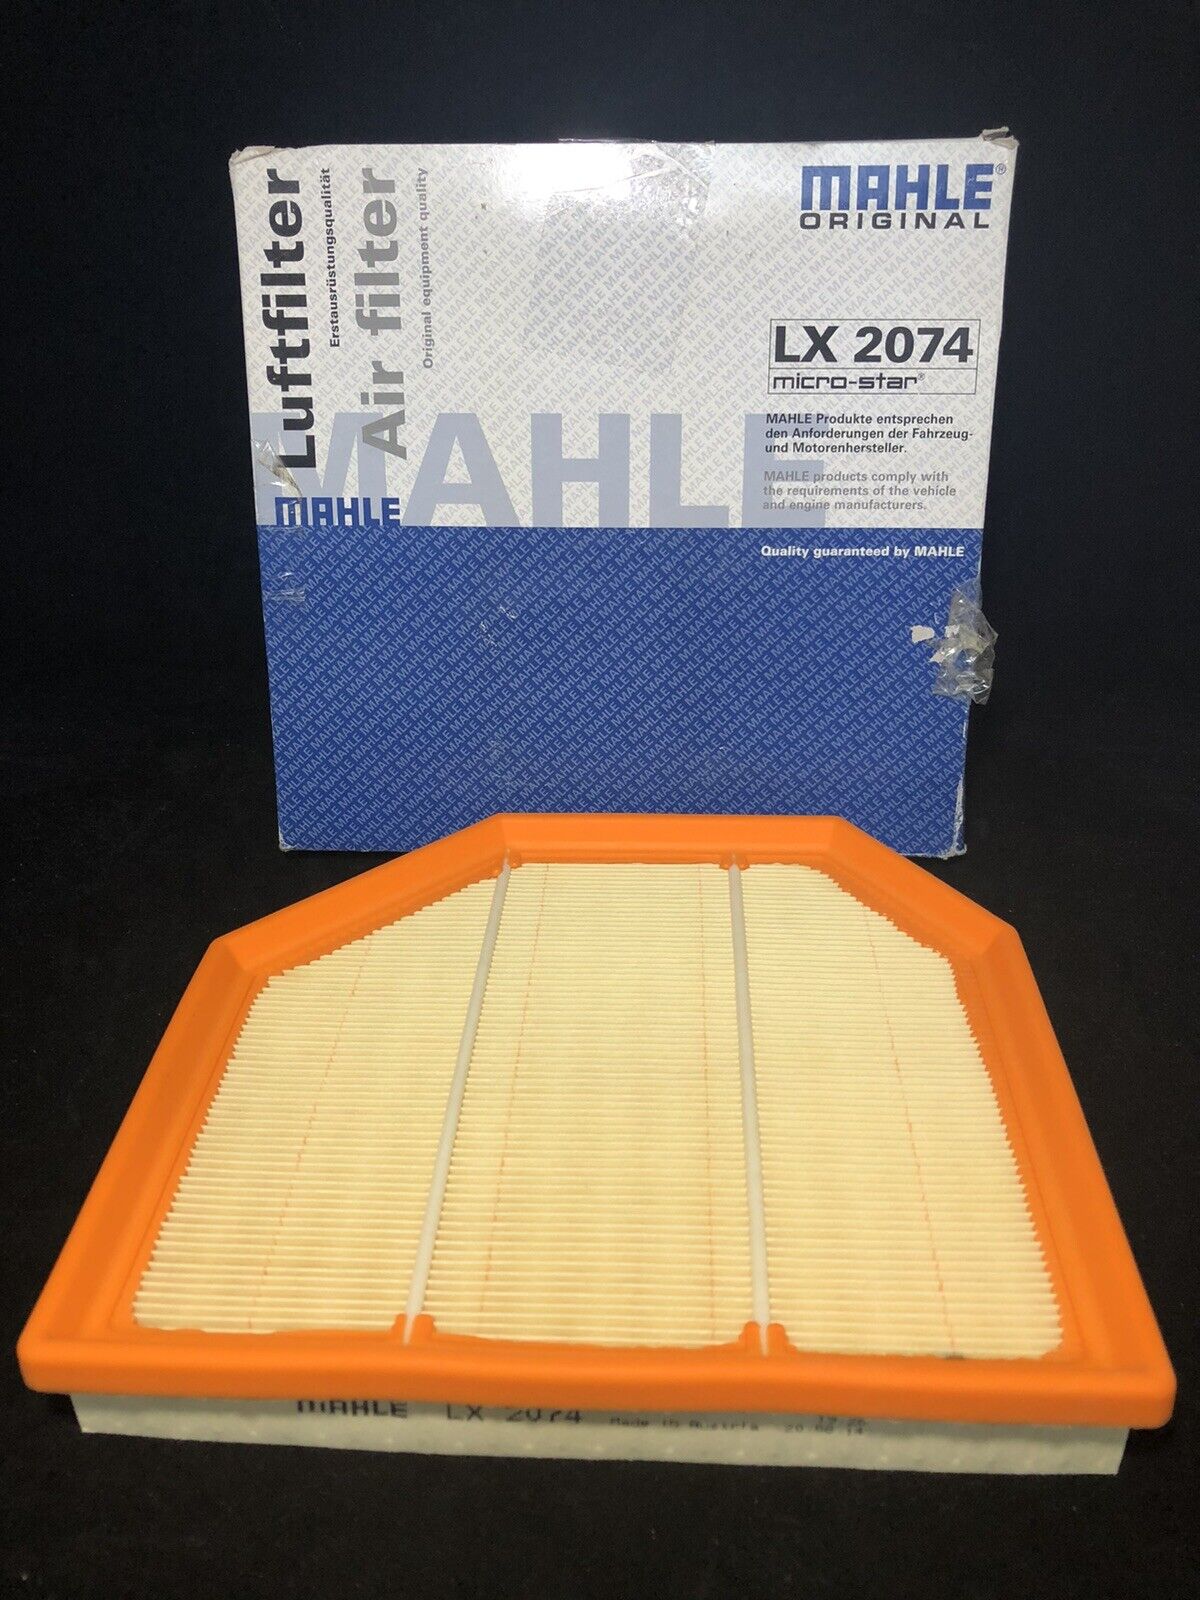 Air Filter  Mahle Original  LX2074 for BMW M5 and M6 4.4L 4395cc Turbo - NEW